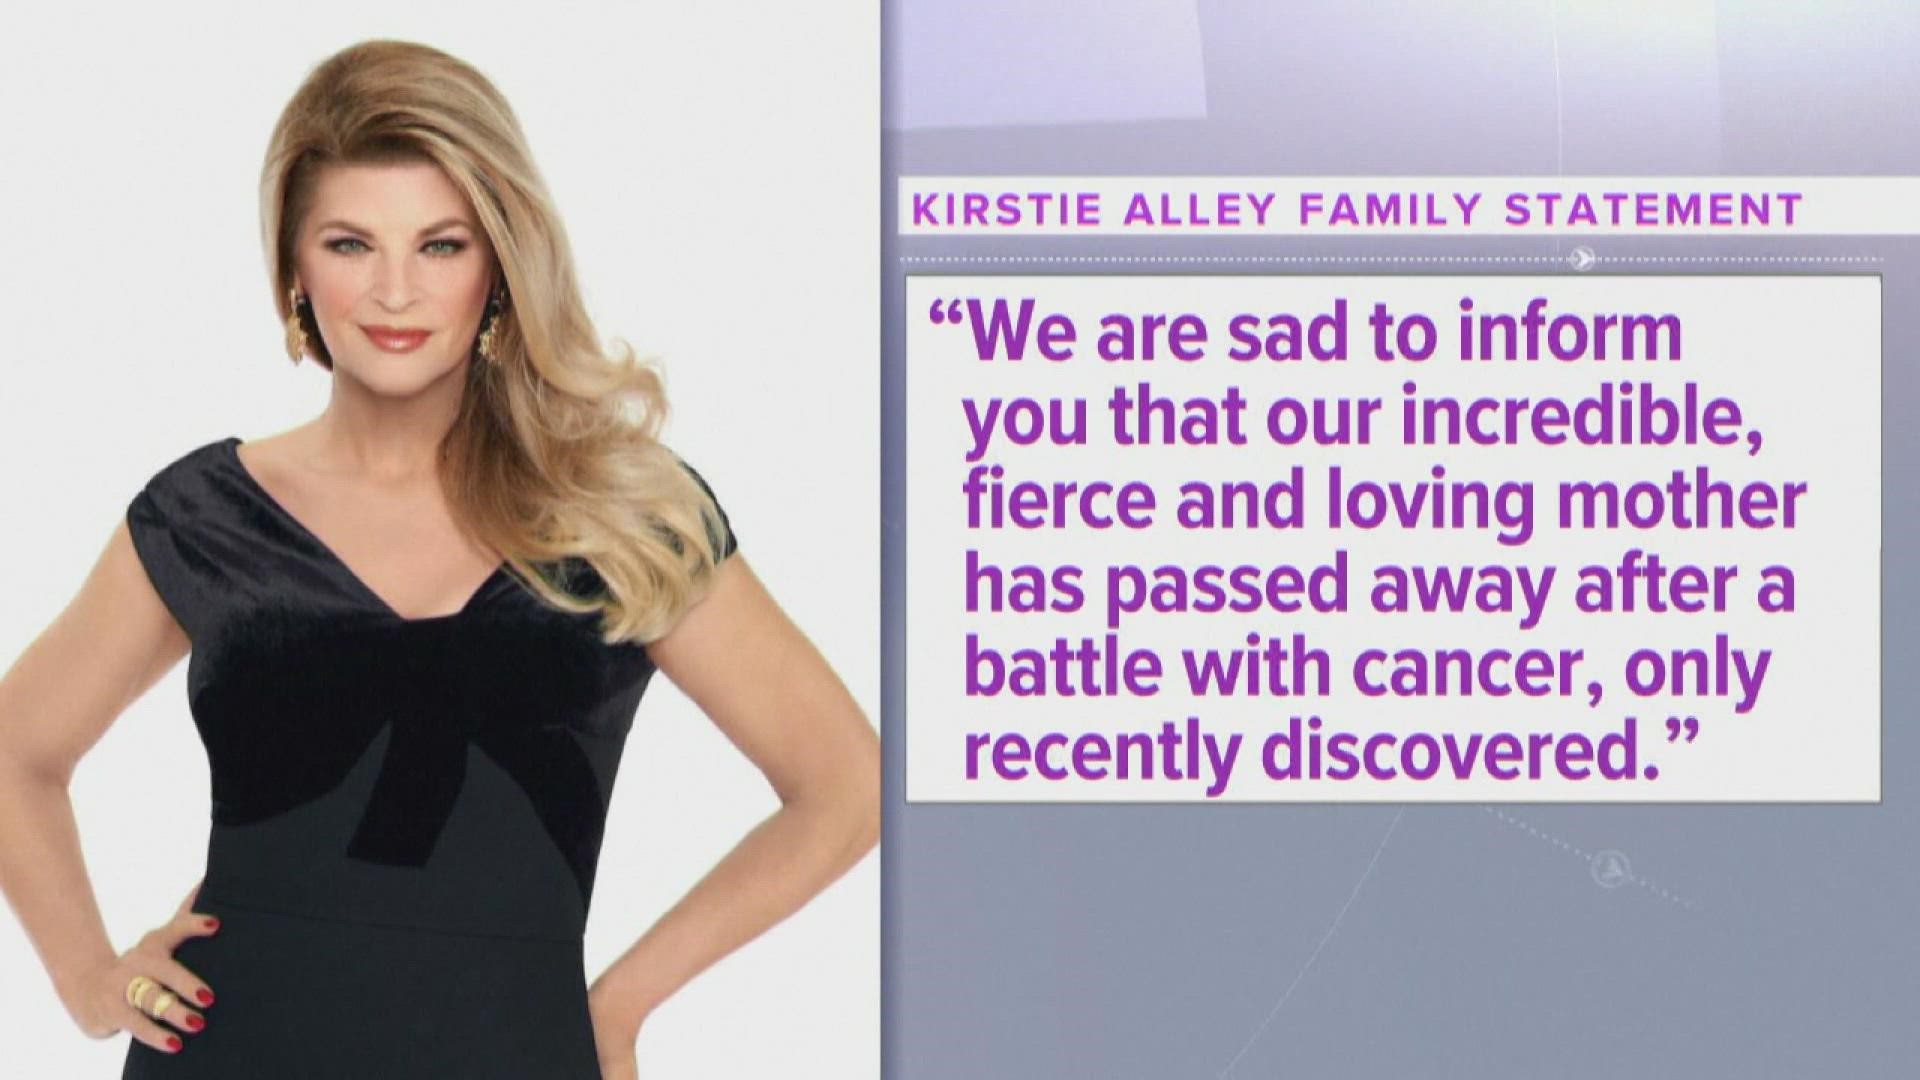 Hollywood is mourning the death of actress Kirstie Alley. She was best known for her role on "Cheers" but she was also a beloved mother and grandmother.